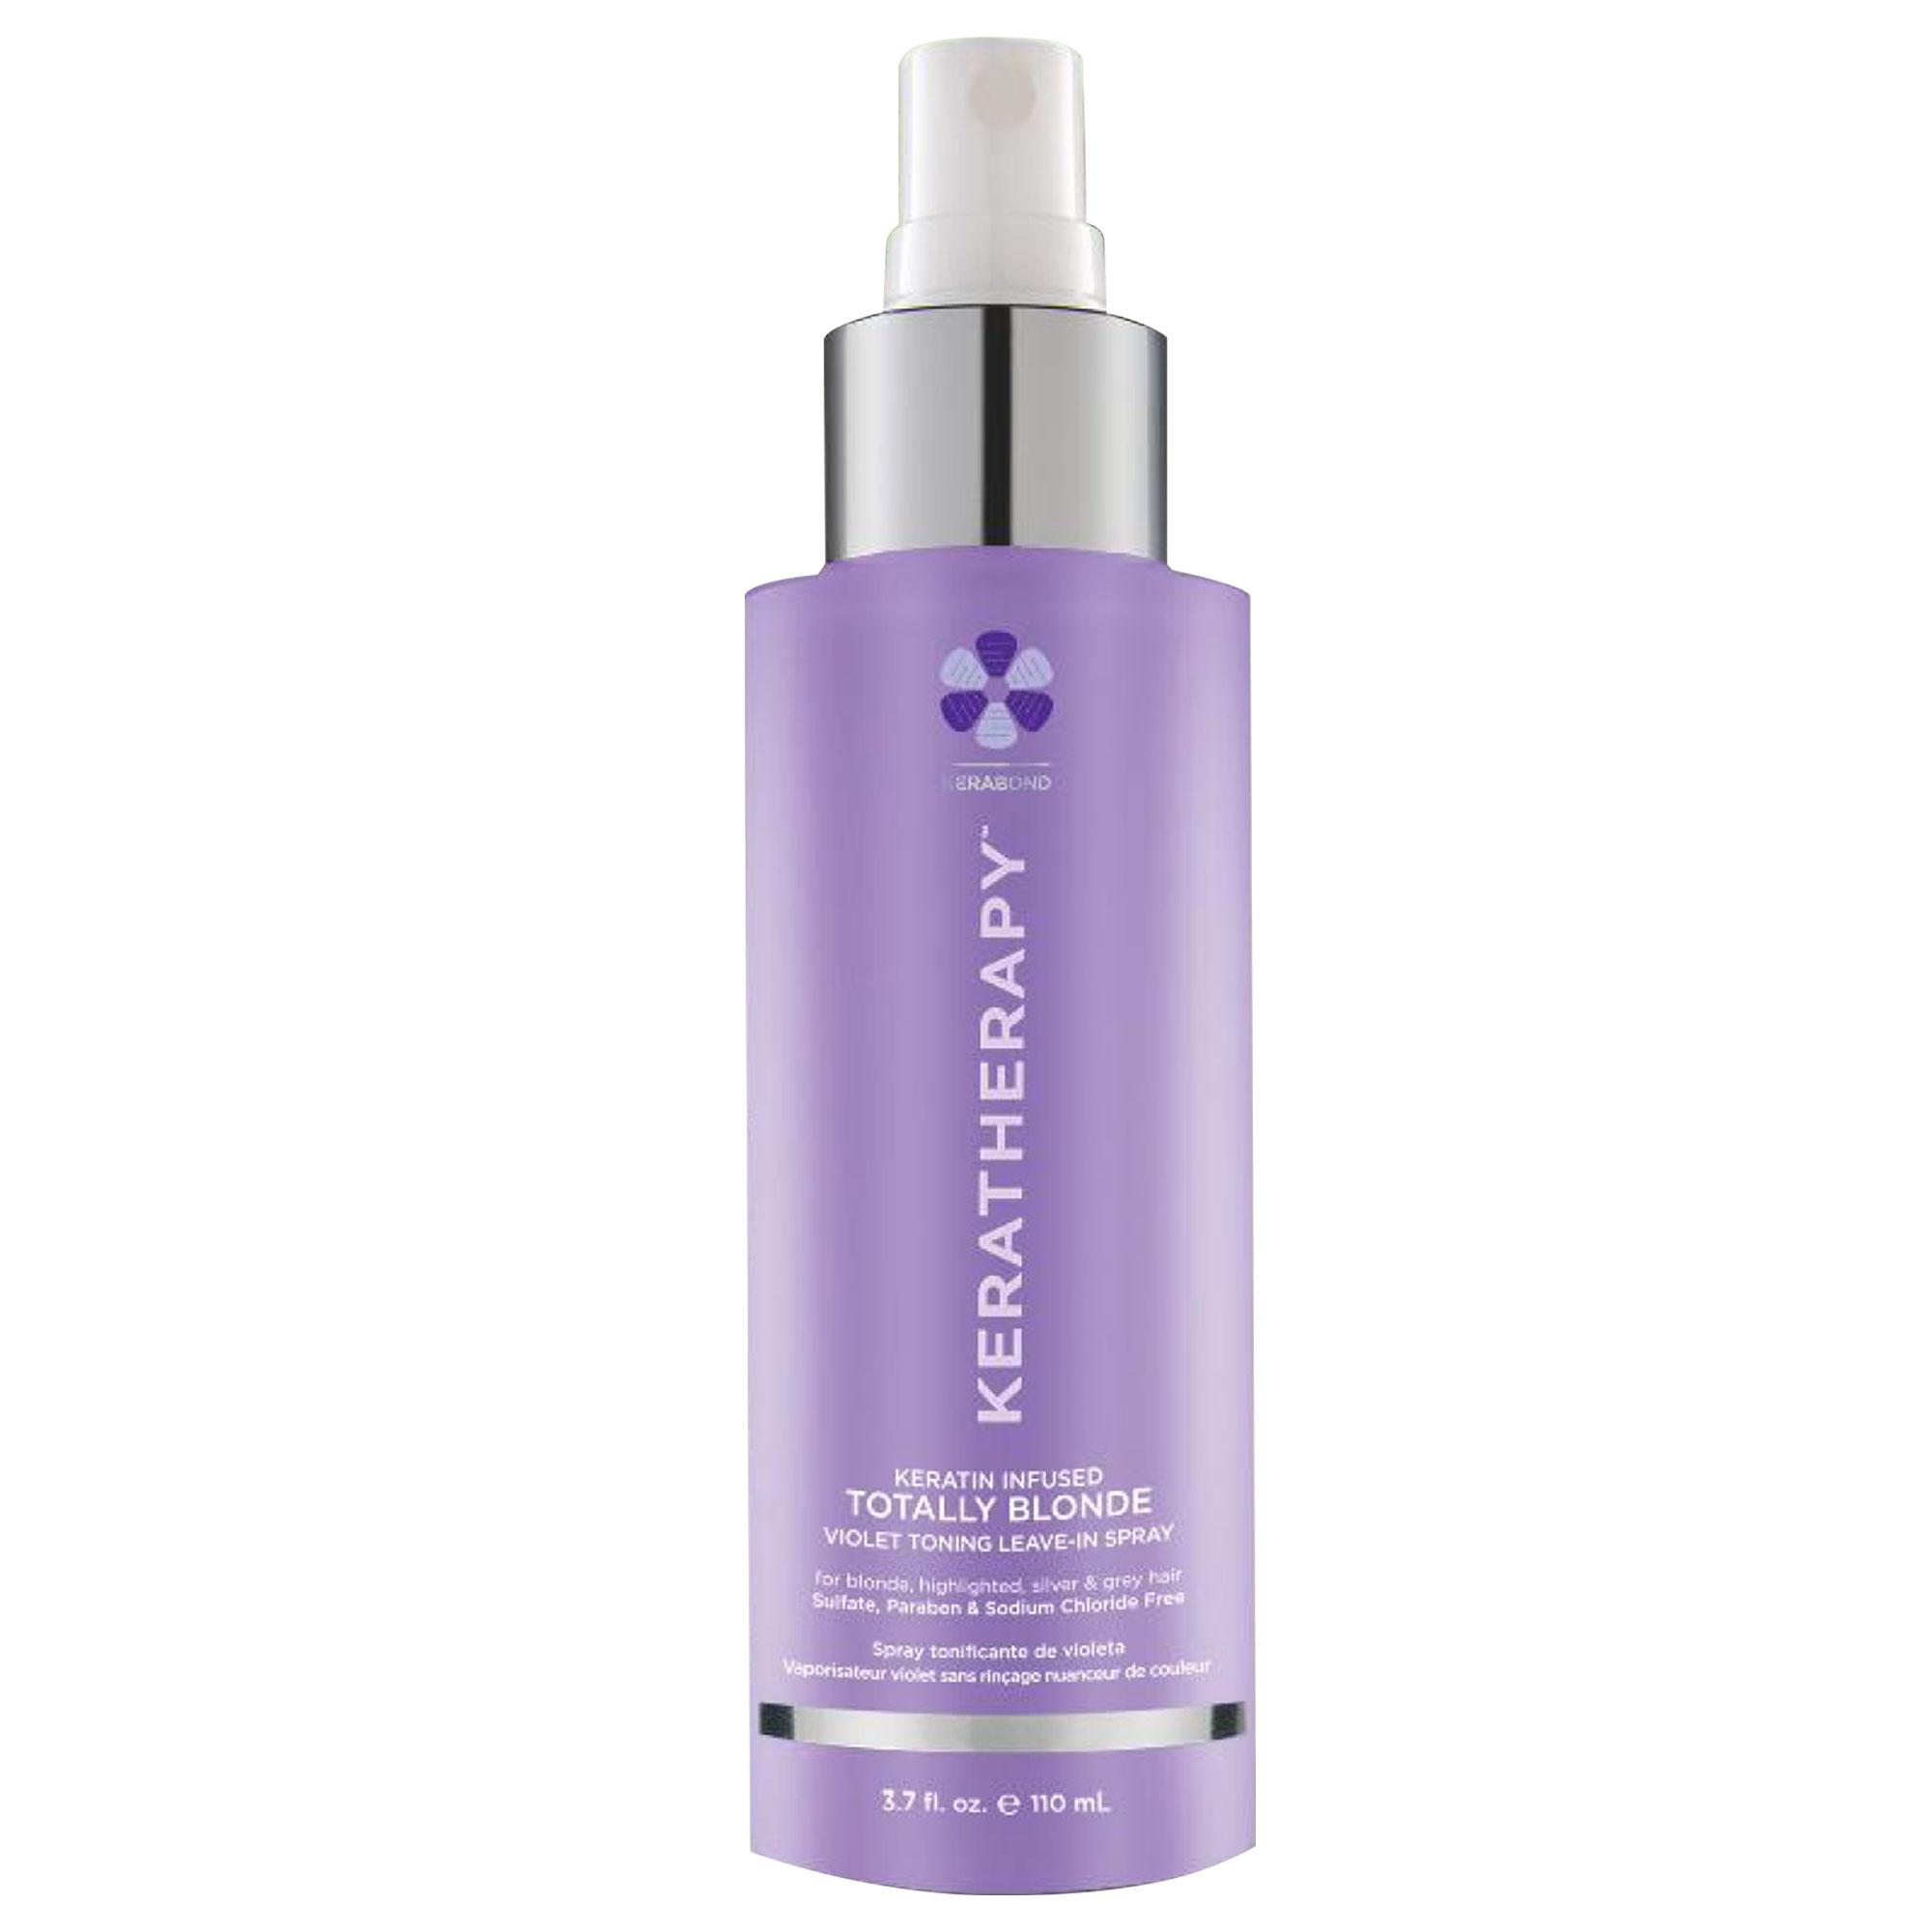 Keratherapy Totally Blonde Violet Toning Leave-in Spray 3.7oz